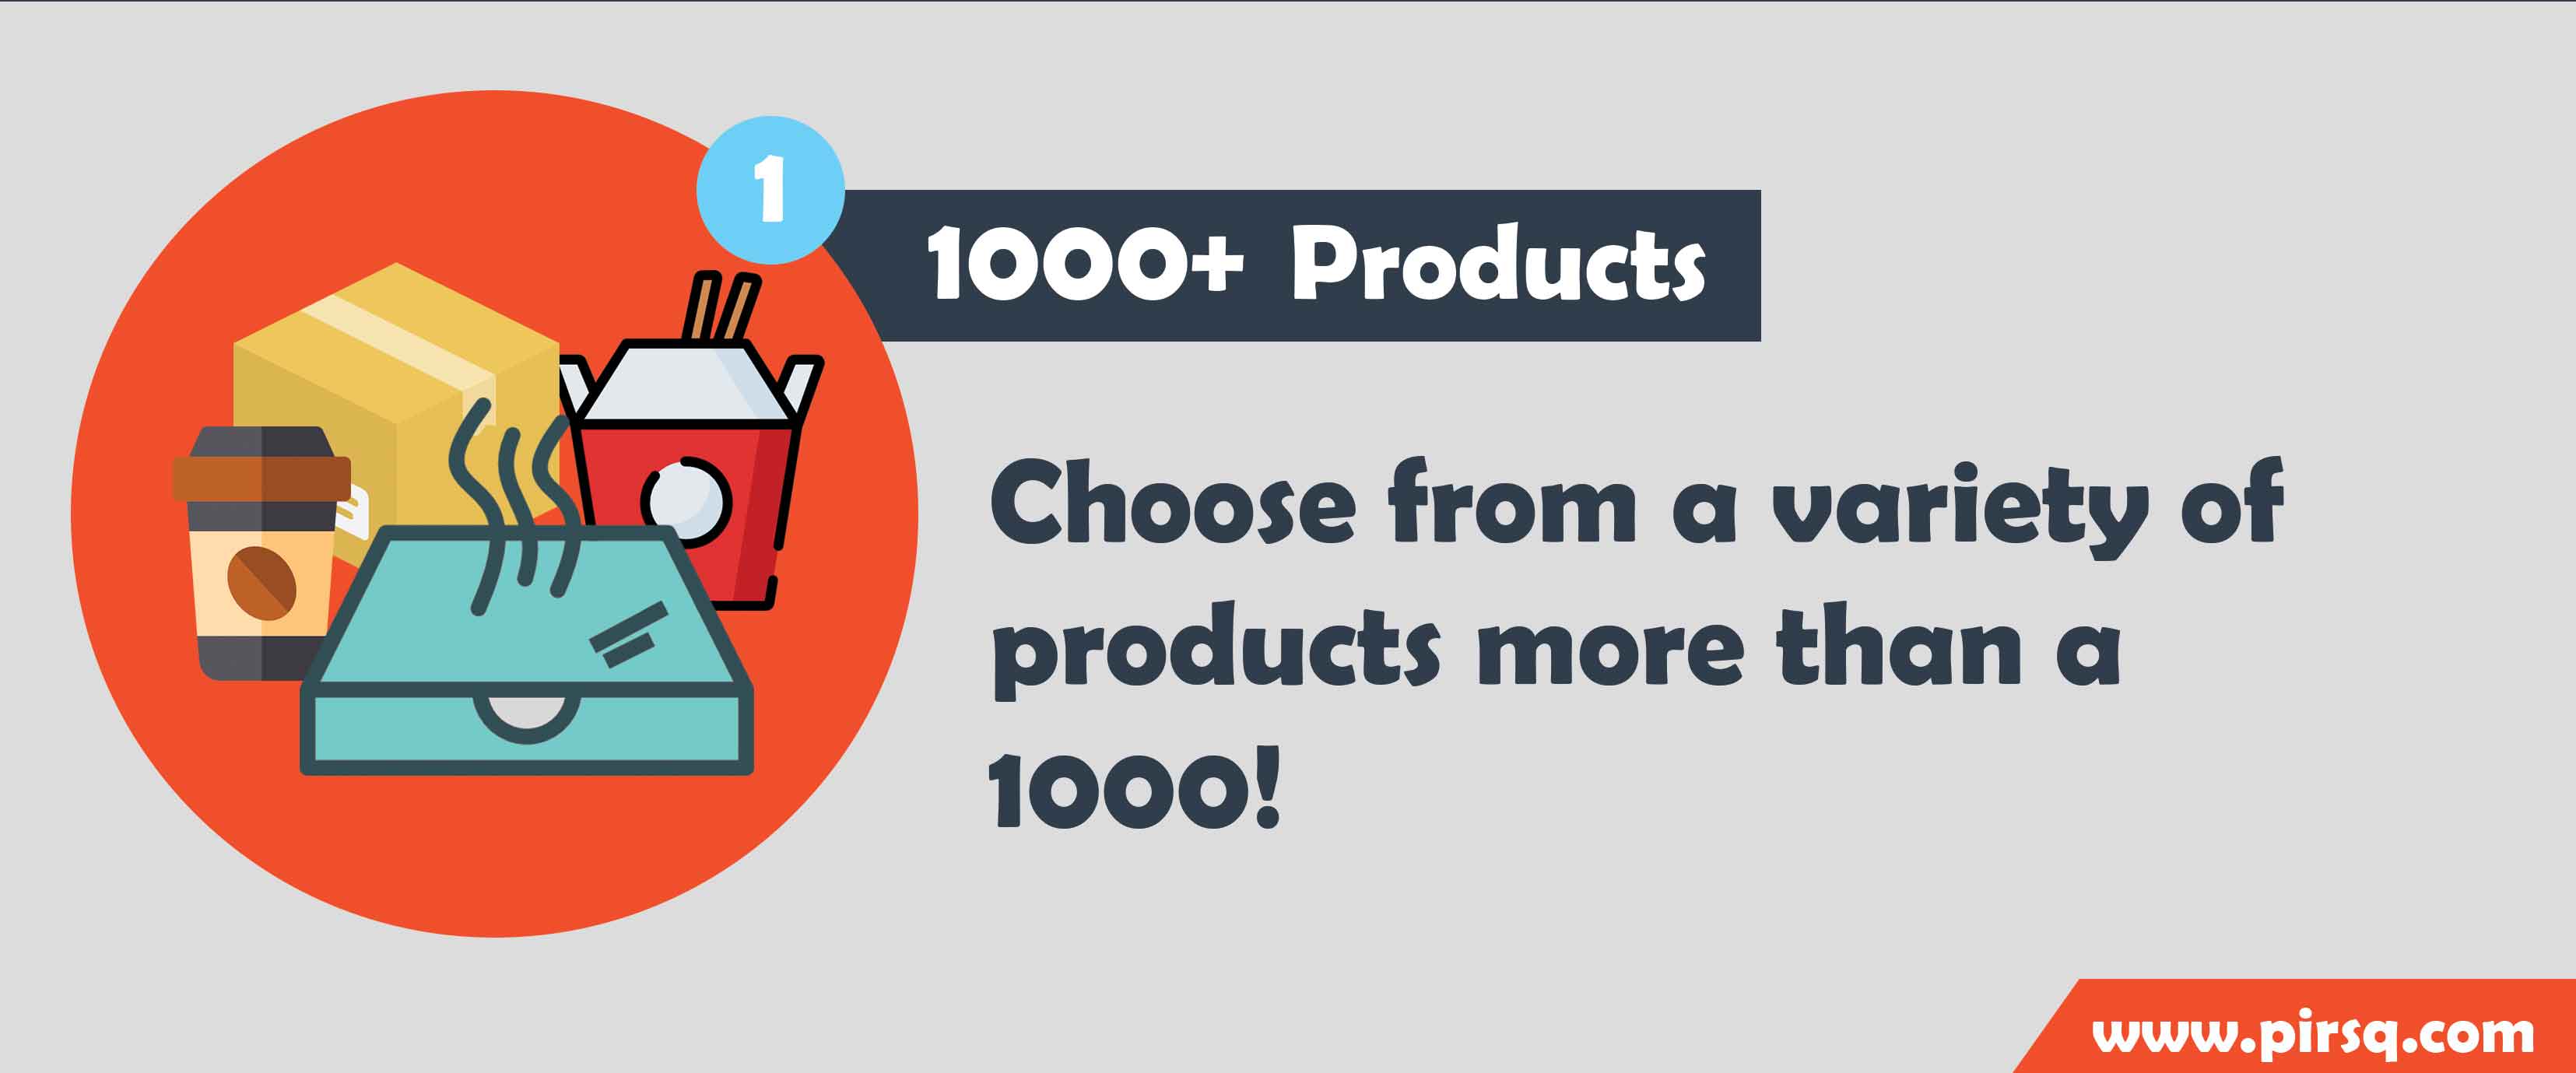 Choose from over a 1000 products!